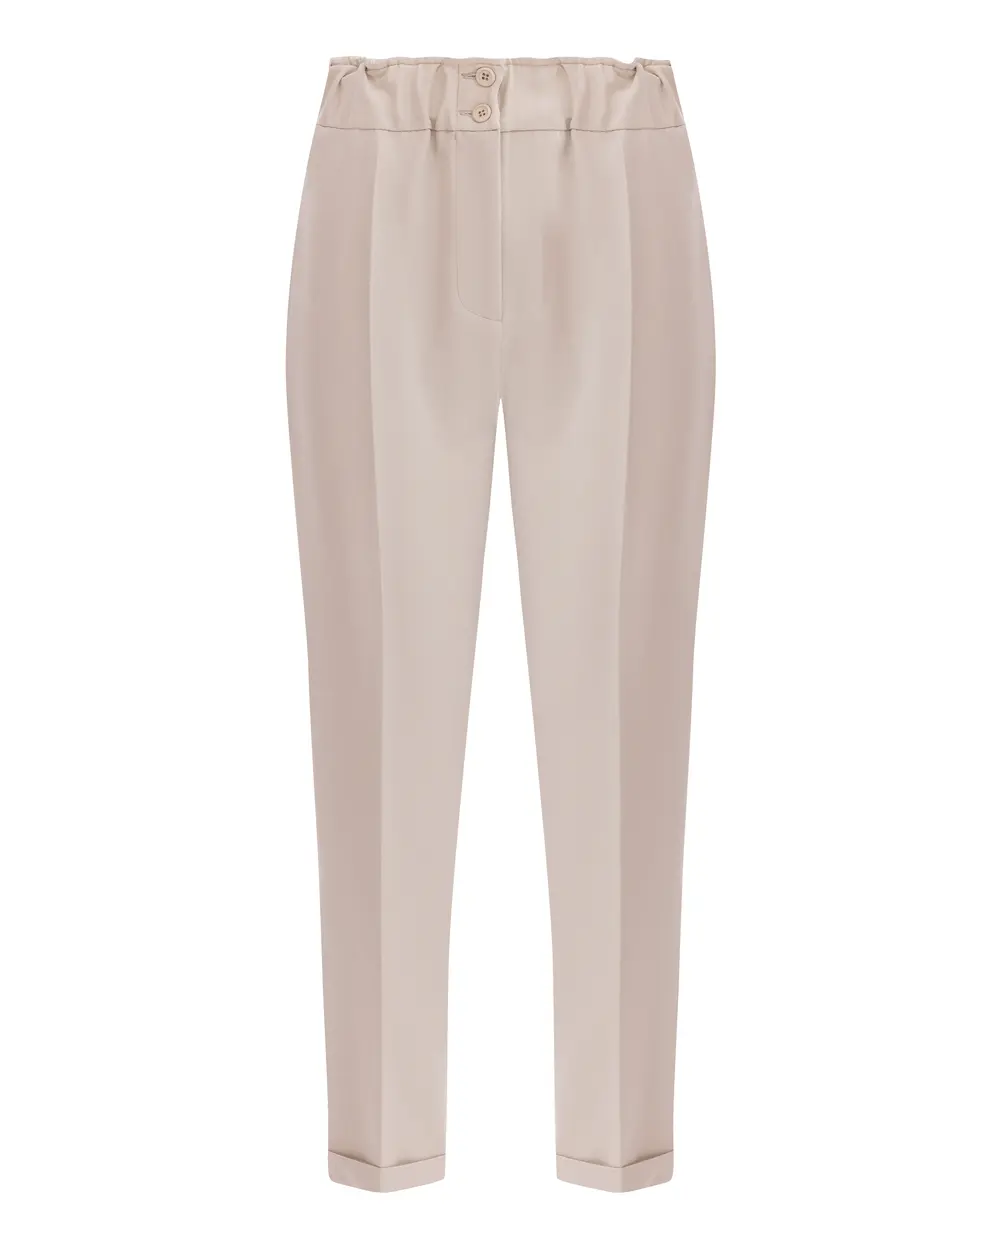 Ankle Length Pants with Drawstring Waist